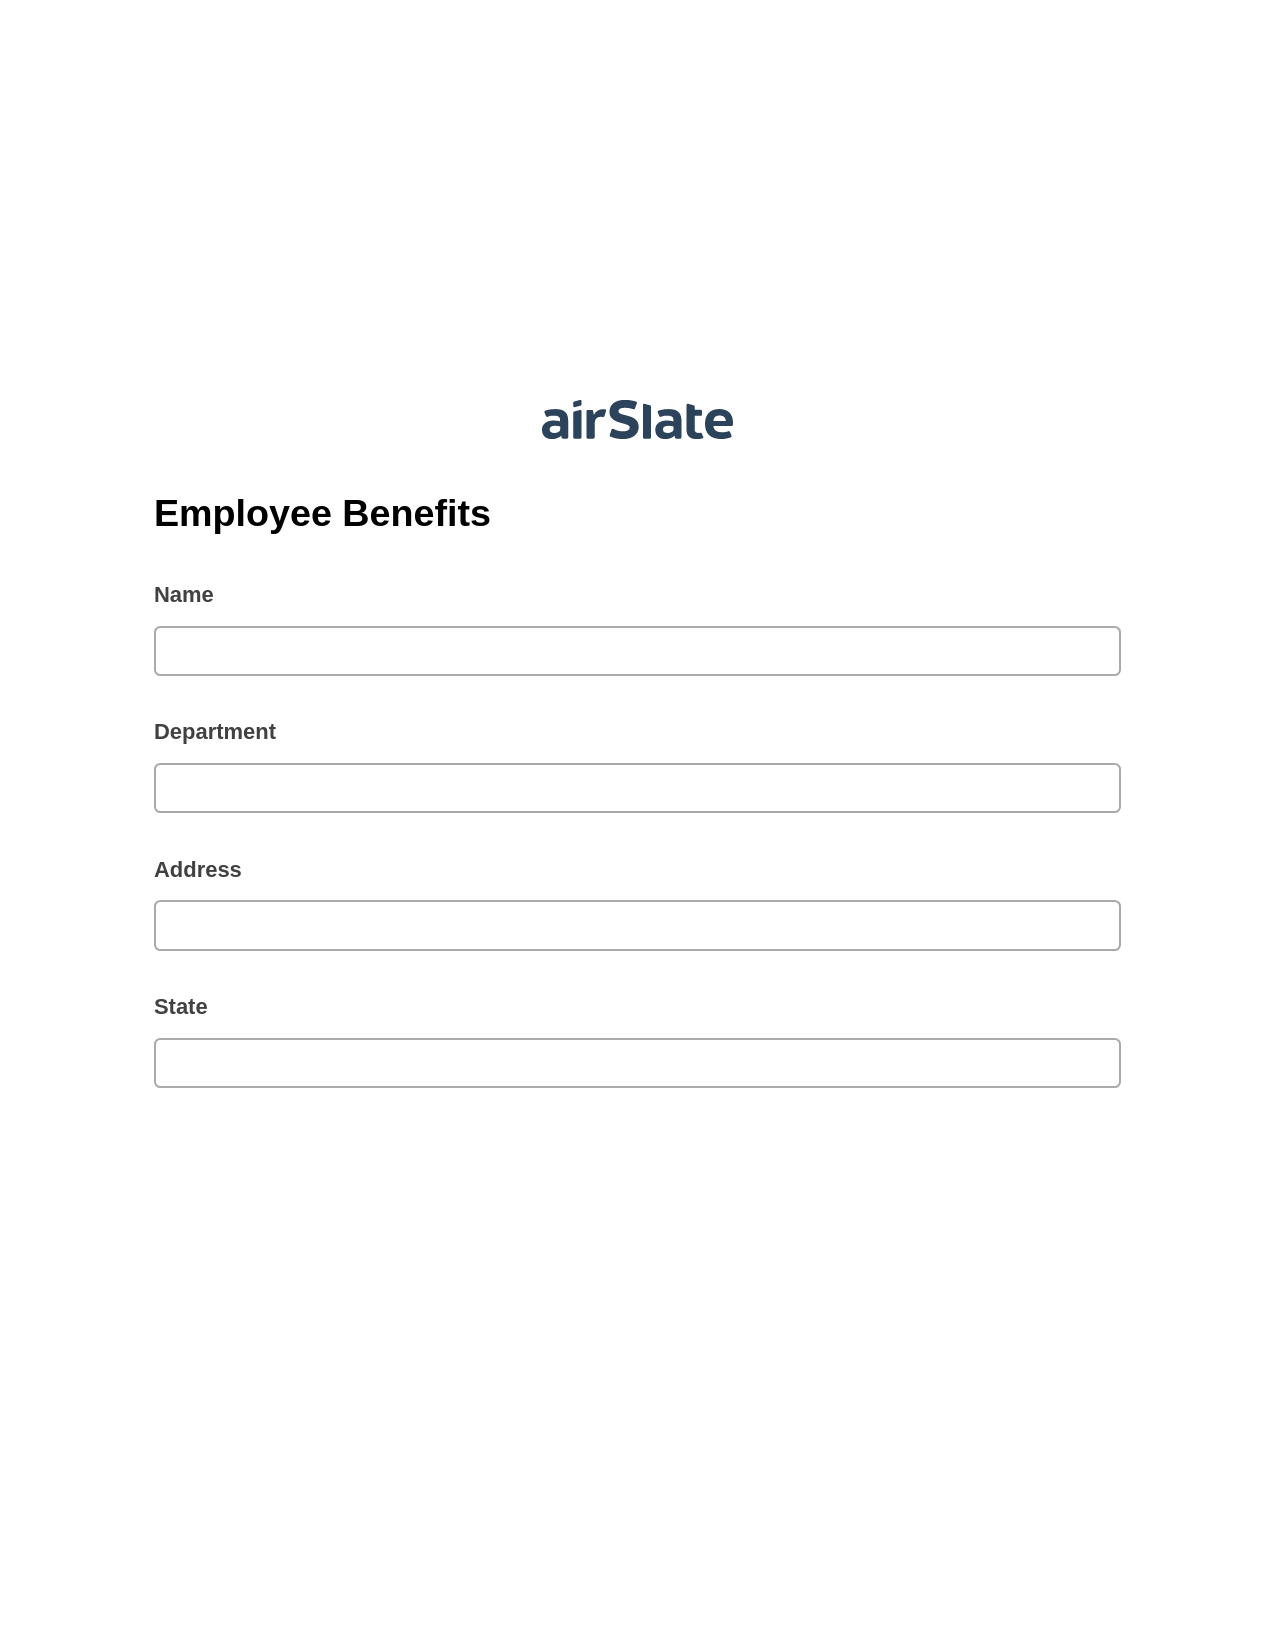 Multirole Employee Benefits Pre-fill from Salesforce Record Bot, Create Salesforce Record Bot, Post-finish Document Bot